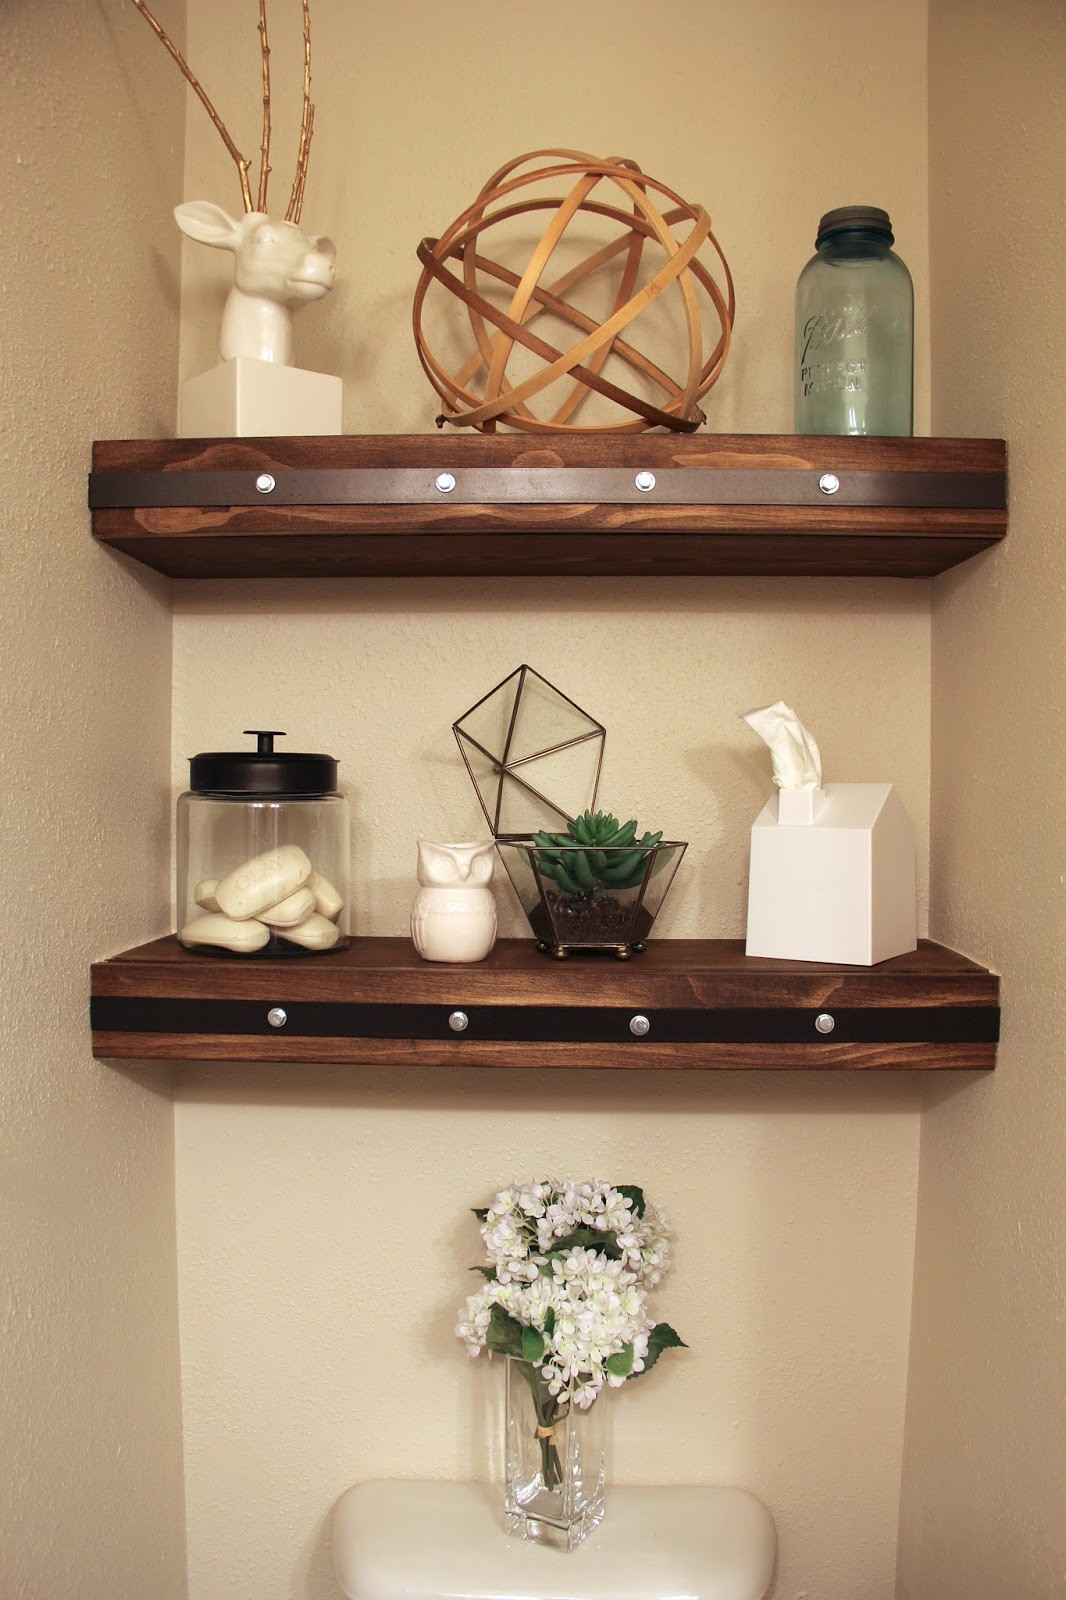 Bathroom Wall Shelves Over Toilet
 DIY Floating Shelves with Faux Rivets